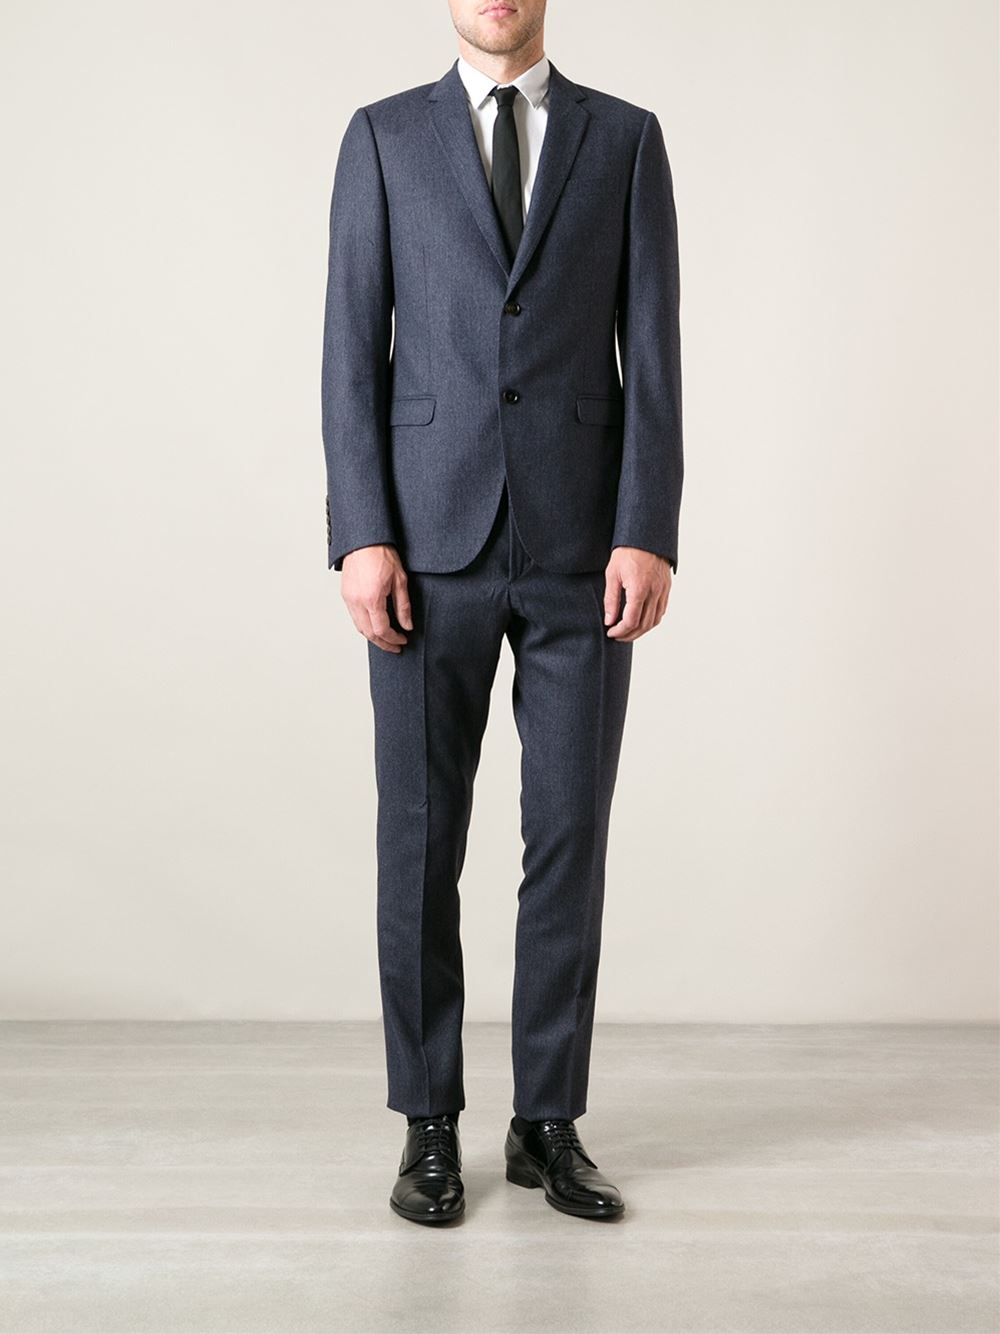 Lyst - Gucci Classic Formal Suit in Blue for Men